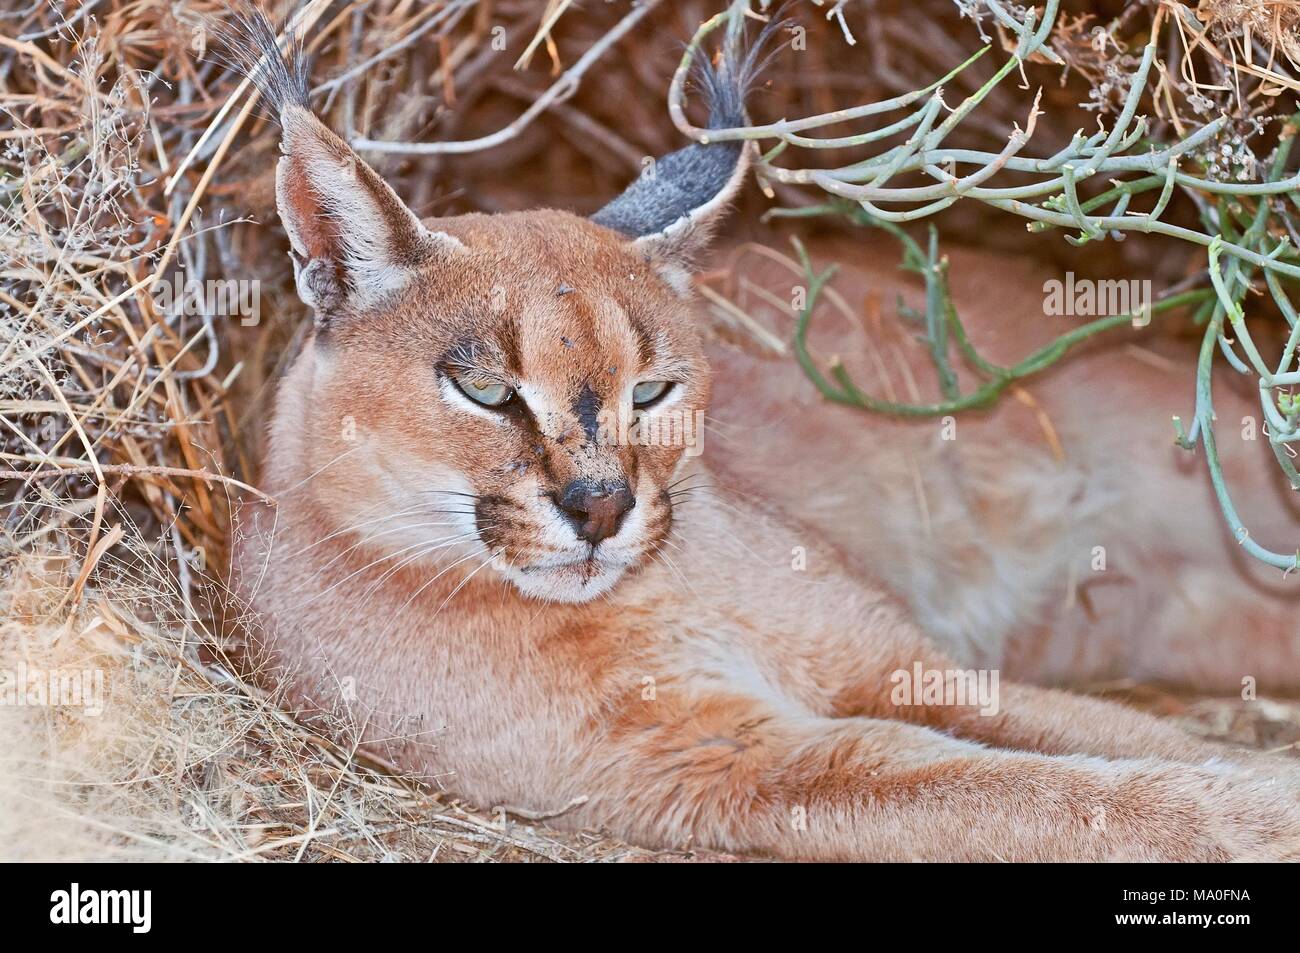 The caracal (Caracal caracal) is a medium-sized wild cat native to Africa,  at the Wildlife Sanctuary in Namibia Stock Photo - Alamy